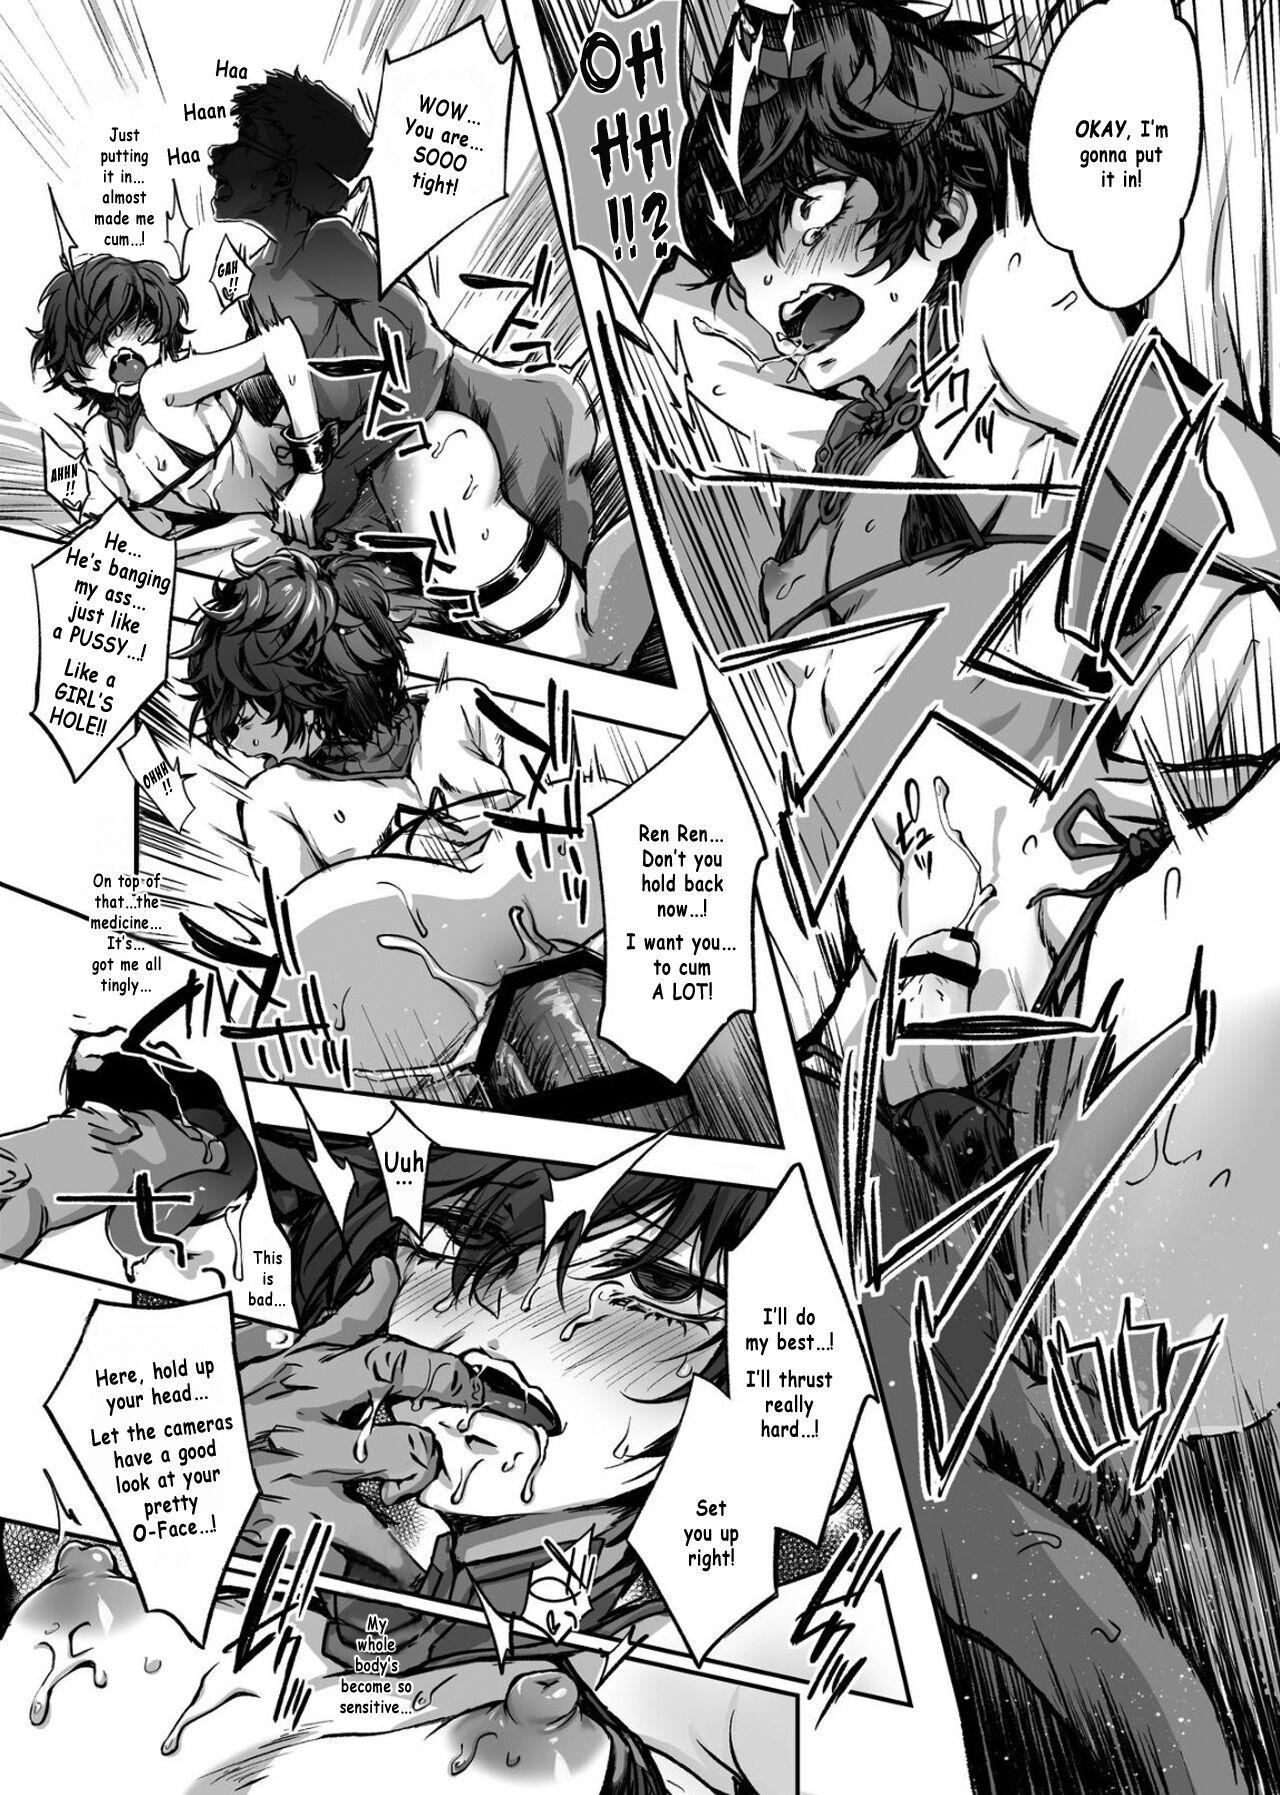 Hardcoresex MobShu | A Thief's Switch gets Flipped - Persona 5 Colombian - Page 5